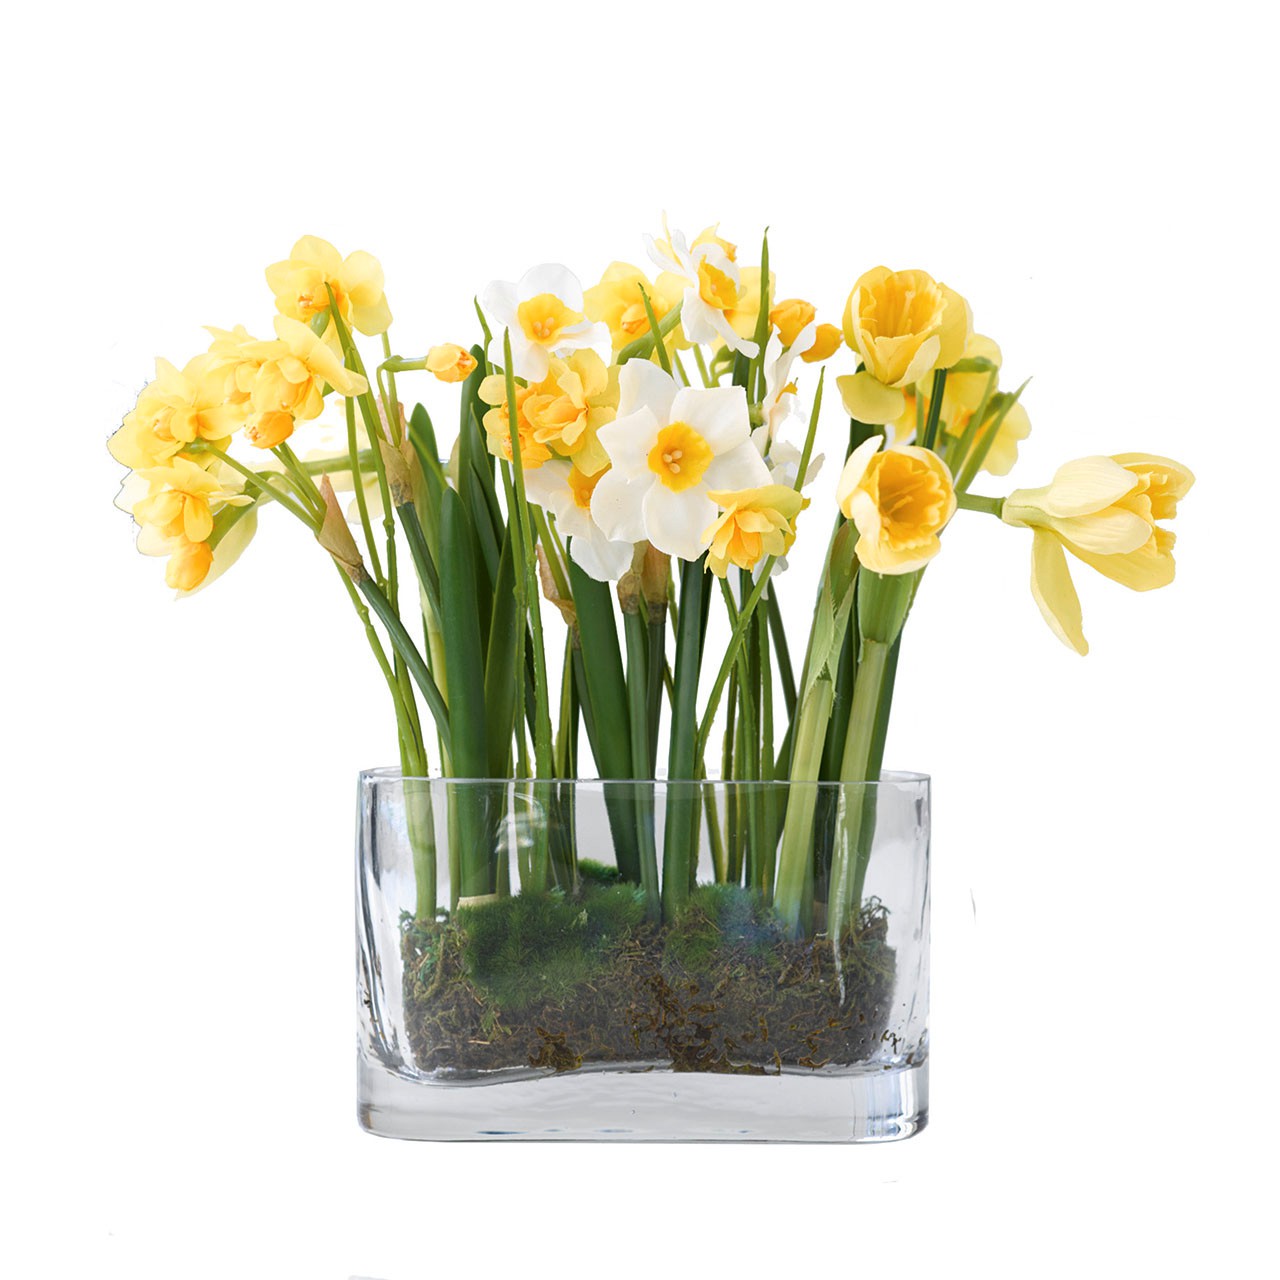 Growing Narcissus Collection